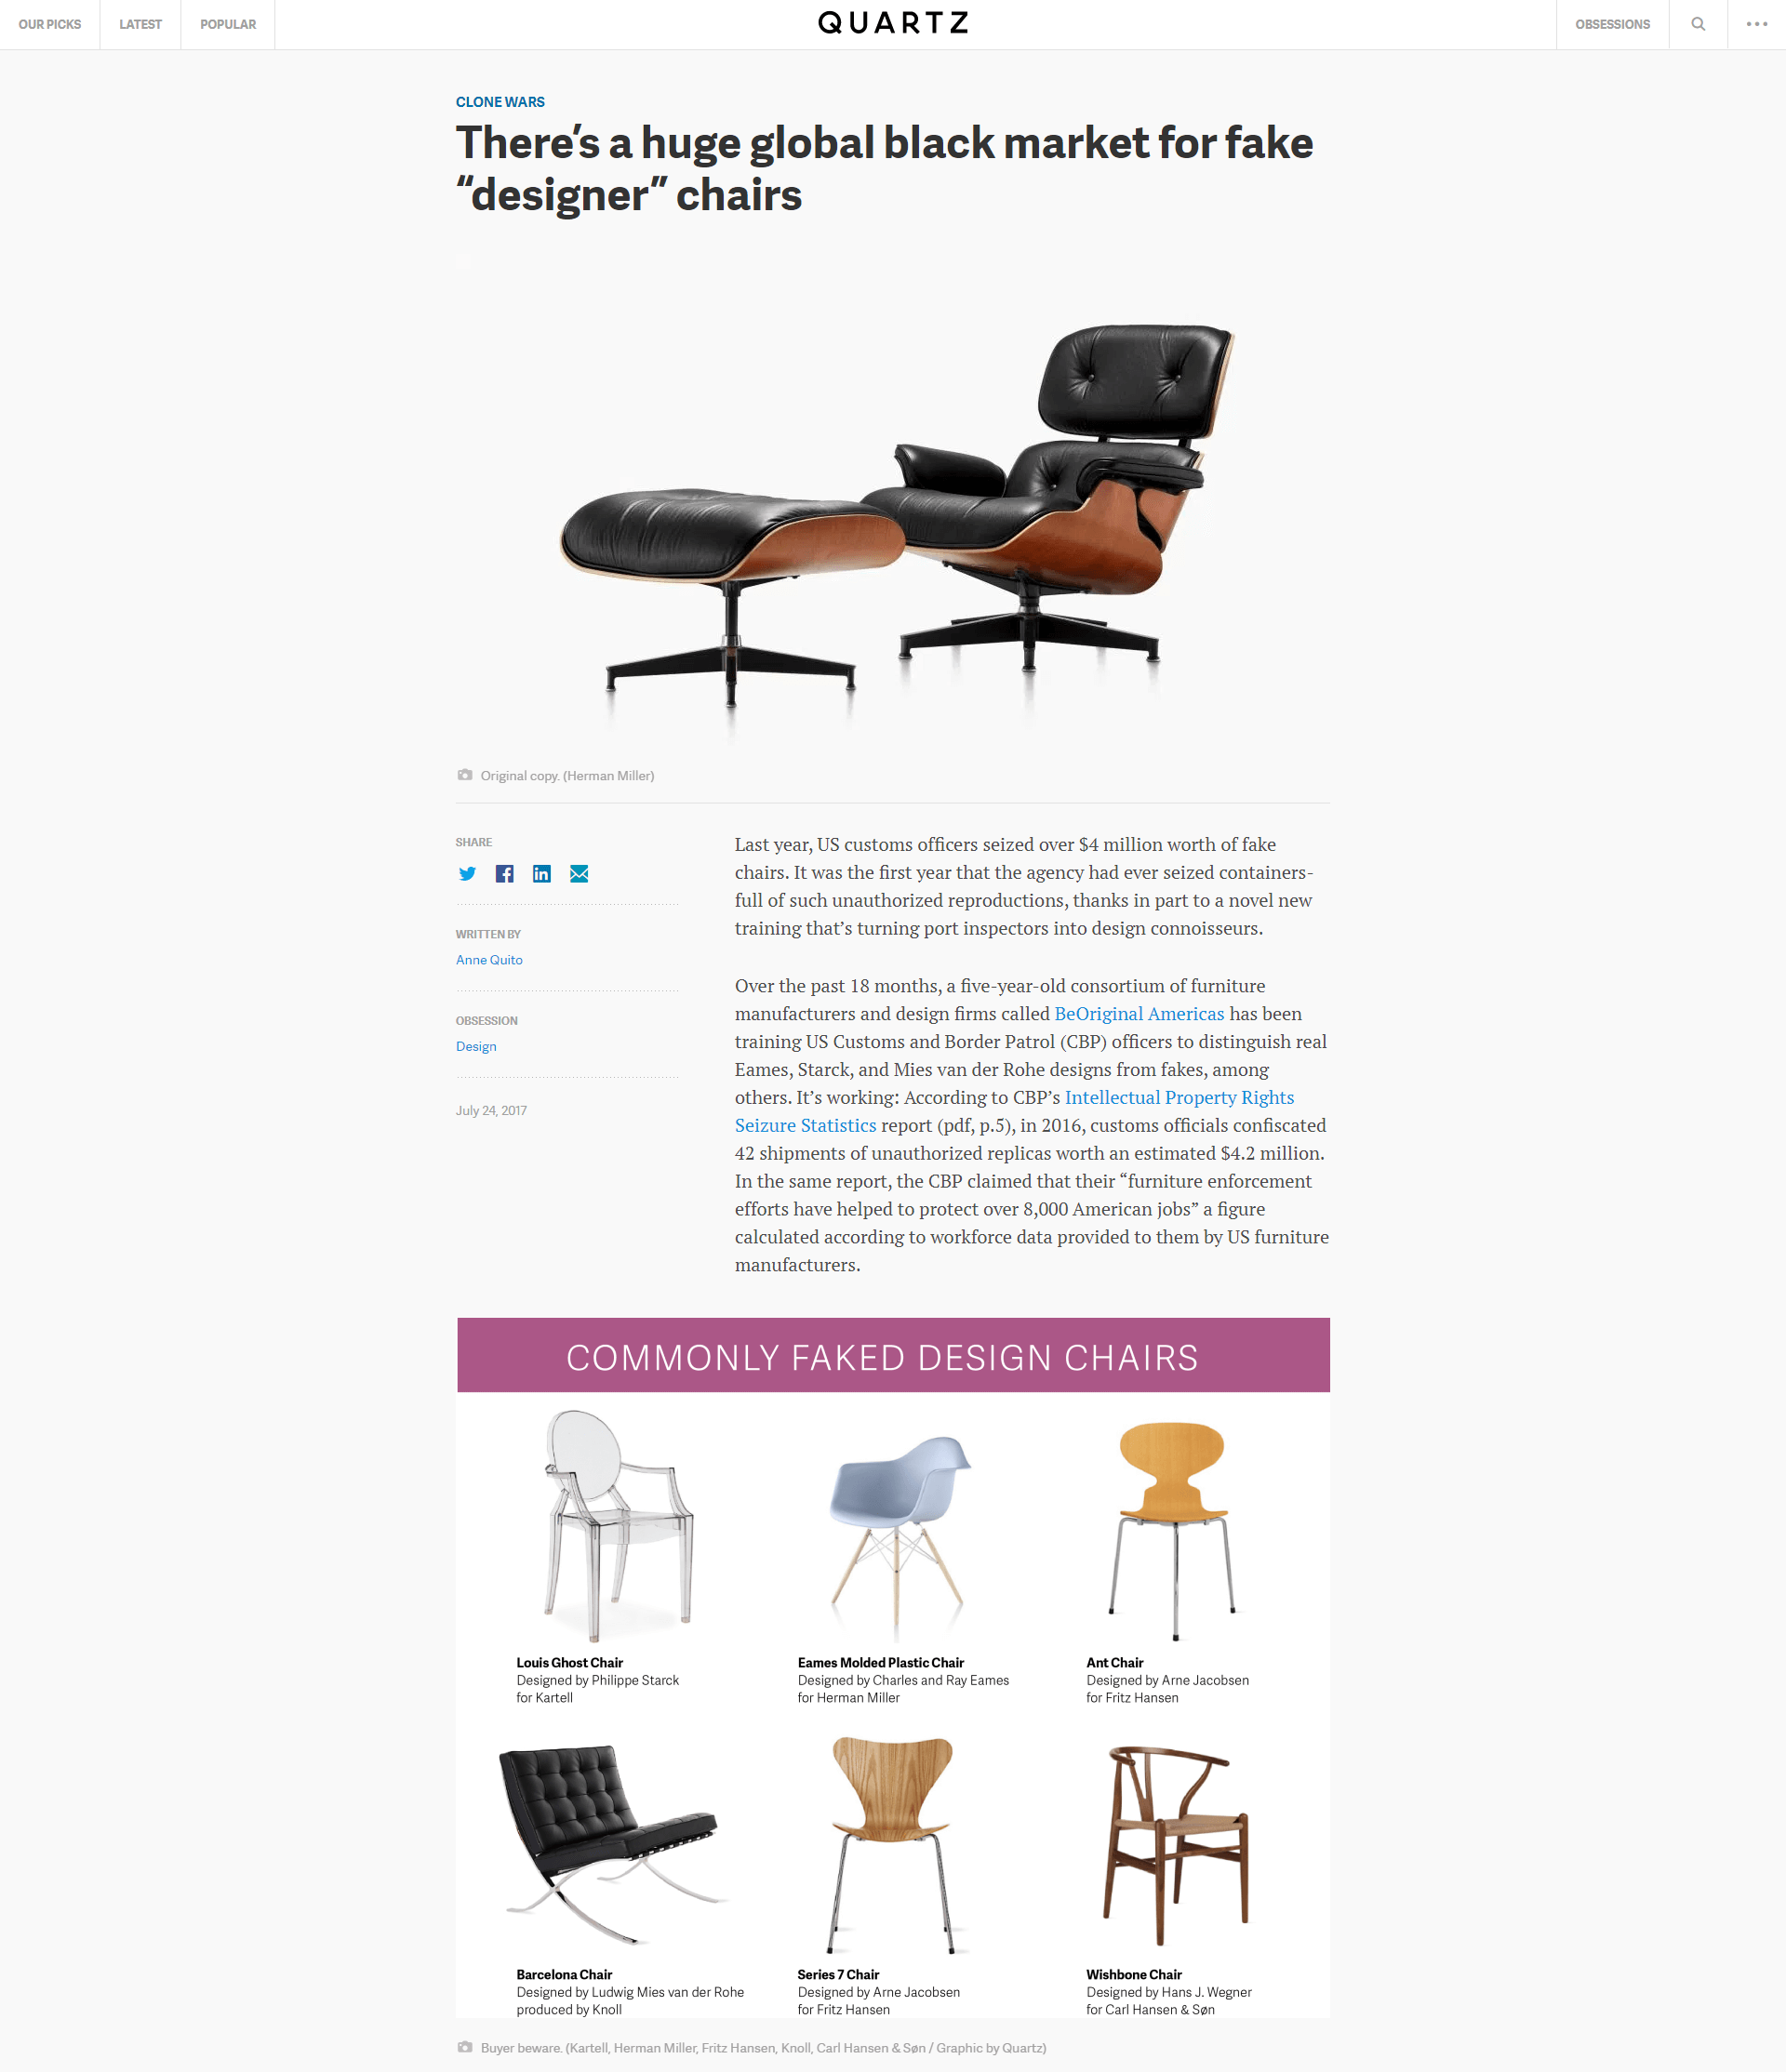 there's a black market for fake “designer” chairs